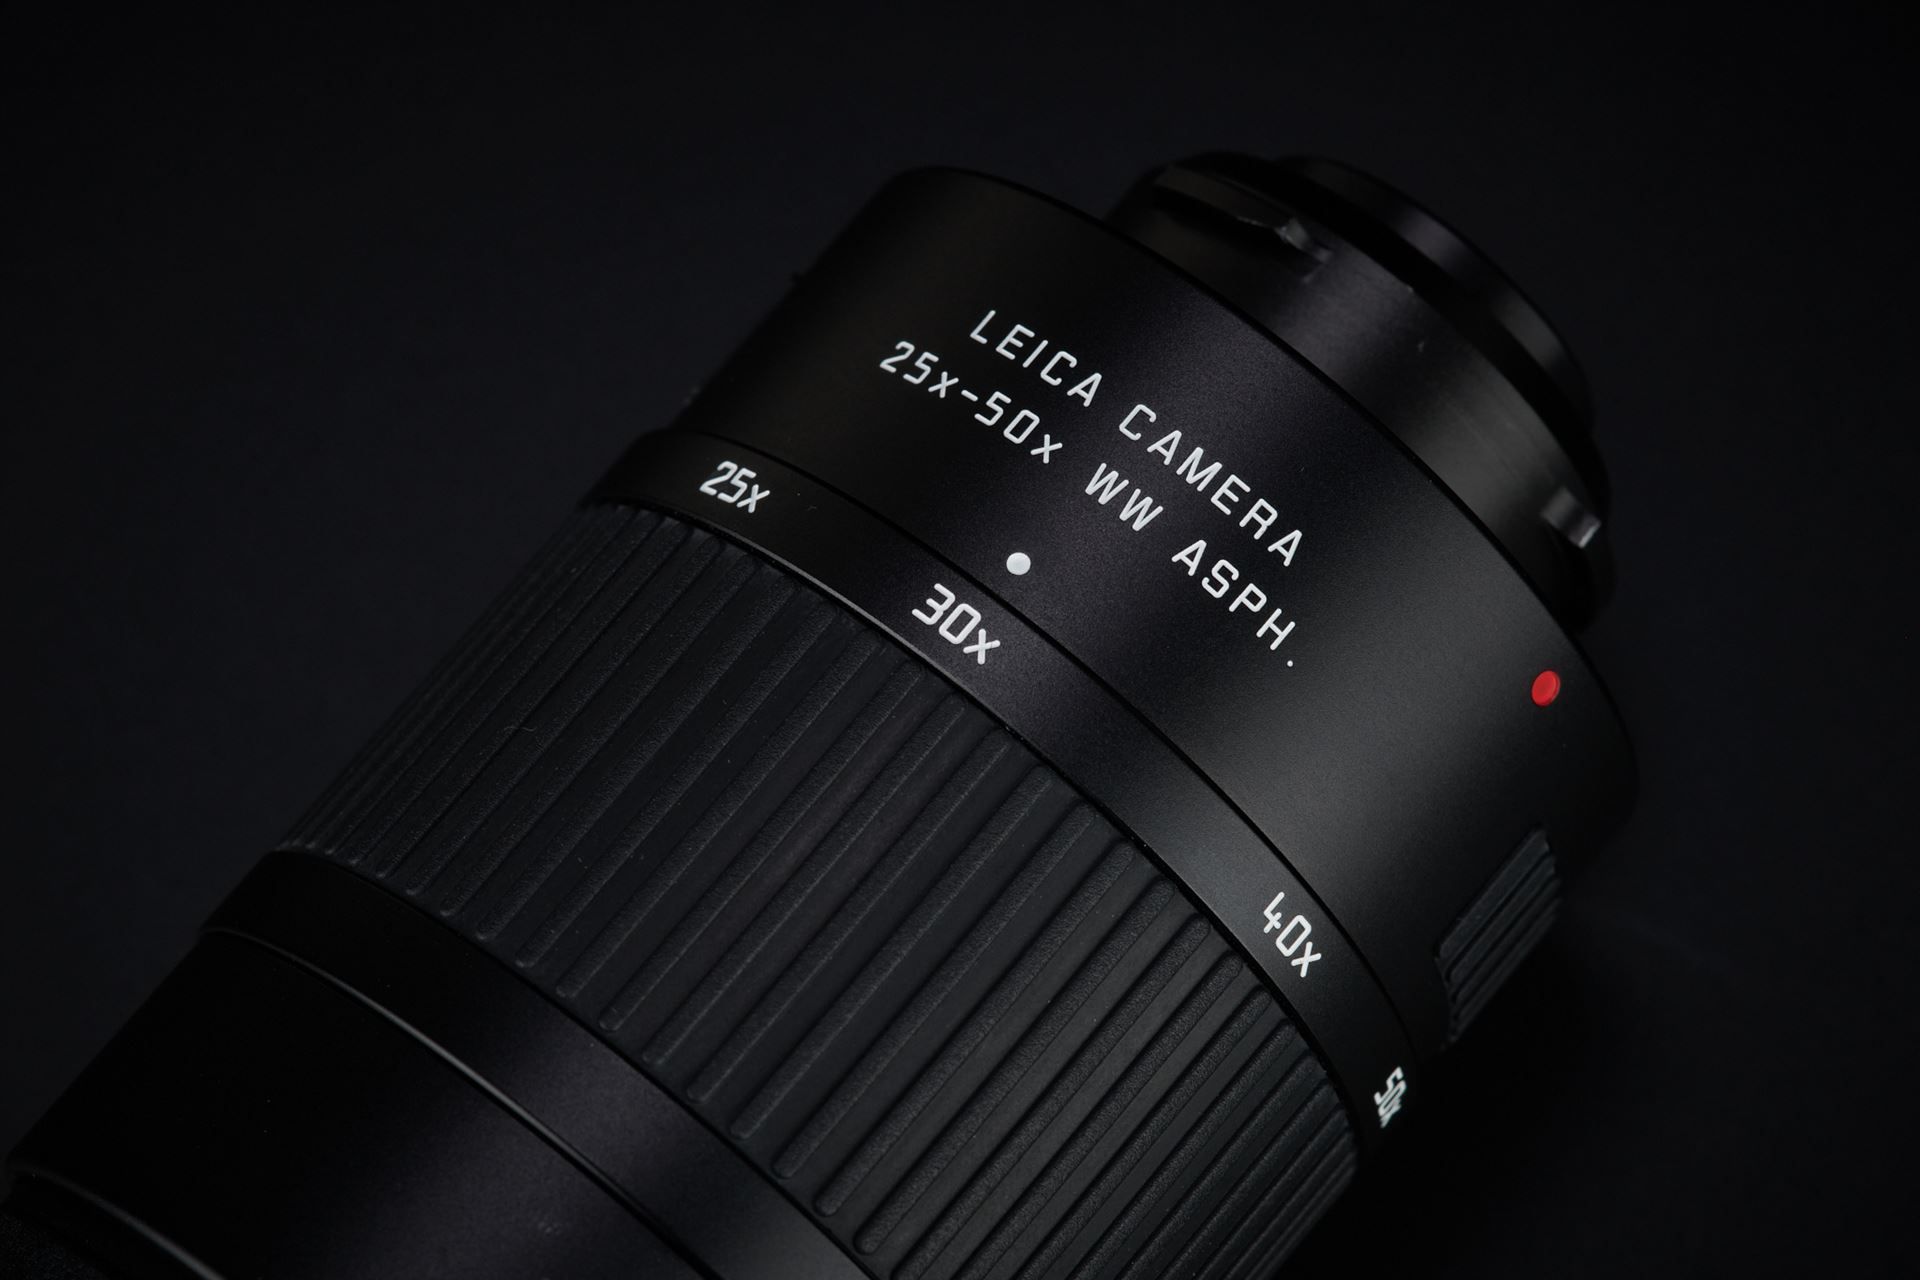 Picture of Leica APO-Televid 82 w/ Leica Zoom Eyepiece 25x-50x WW Asph. and Leica Ever Ready Case